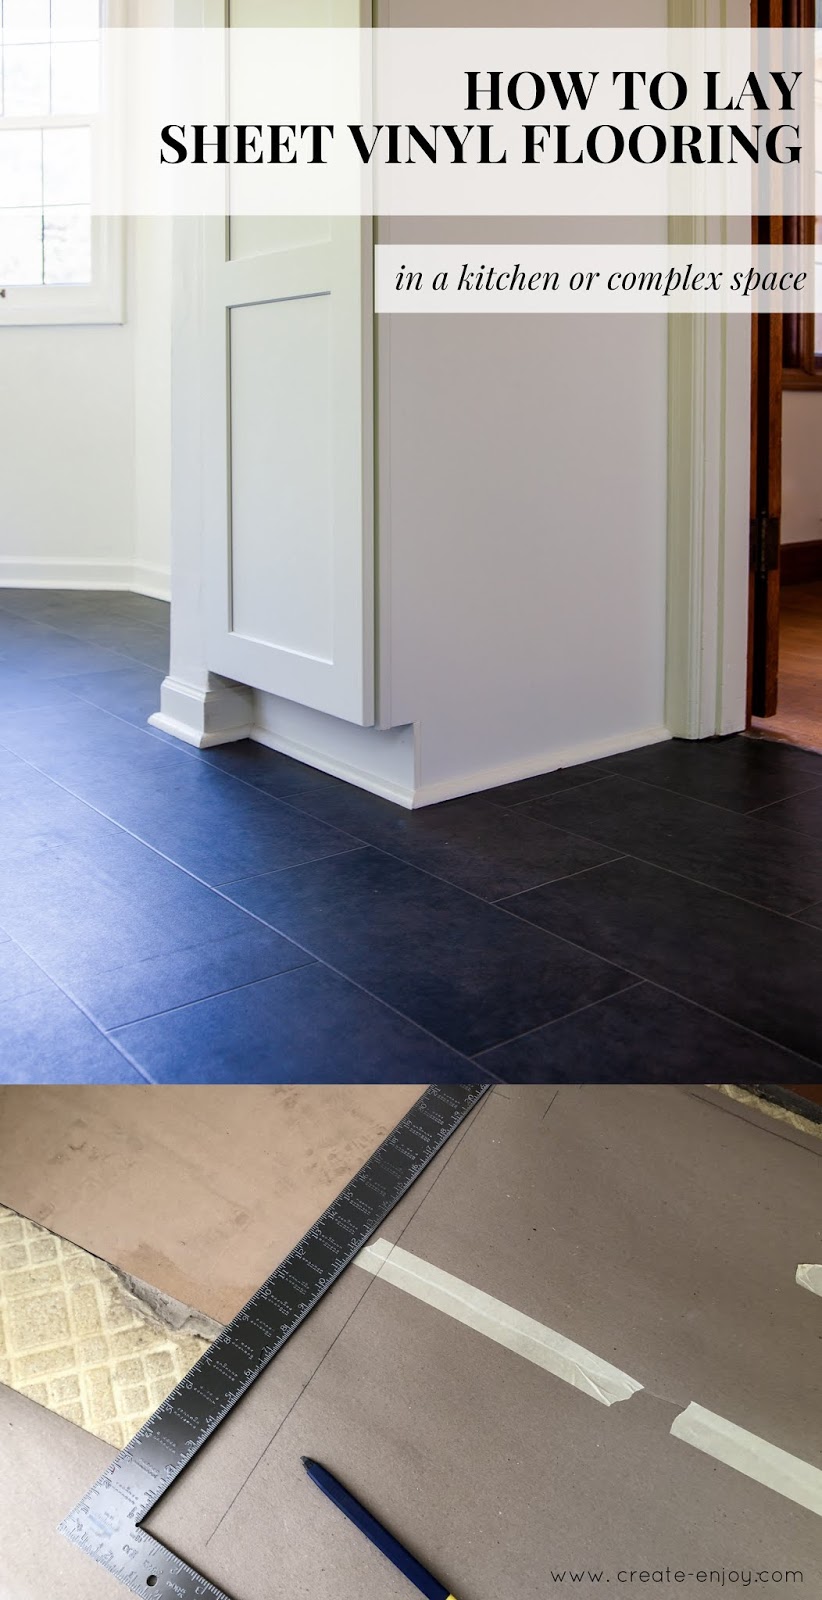 How To Lay Sheet Vinyl Flooring In A Complex